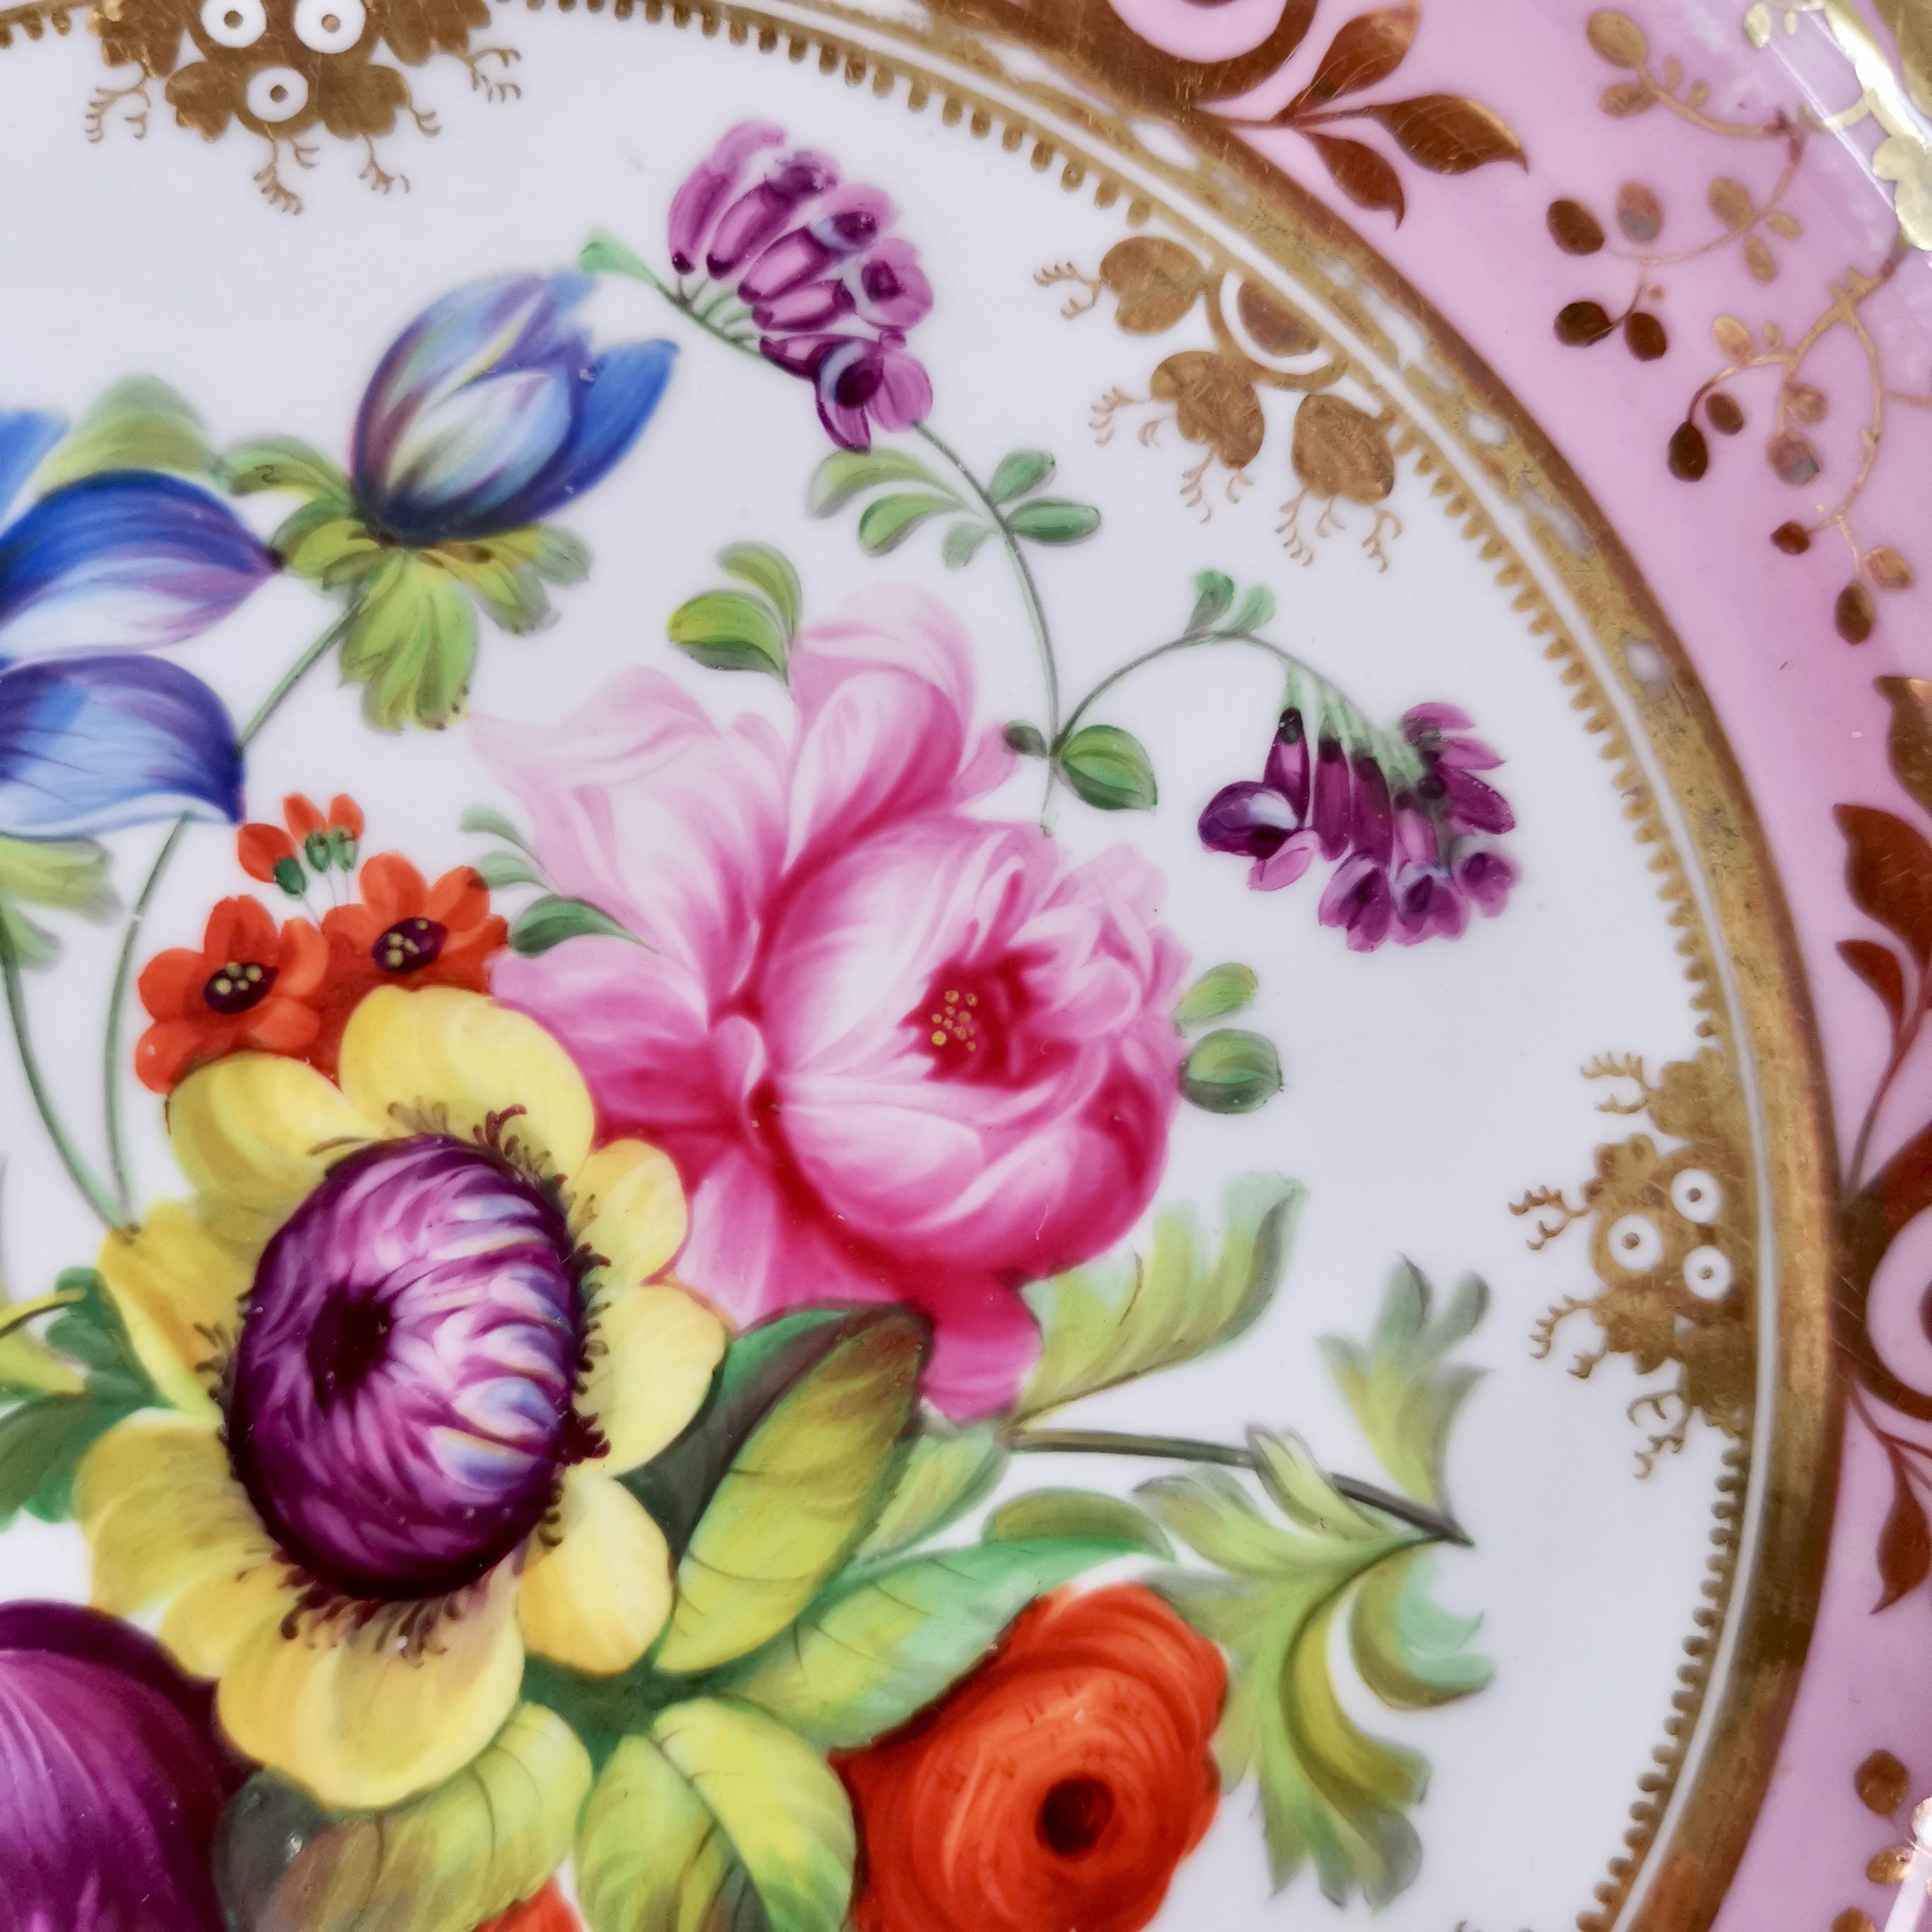 Early 19th Century Ridgway Porcelain Plate, Mauve, Pink and Flowers, Regency, ca 1829